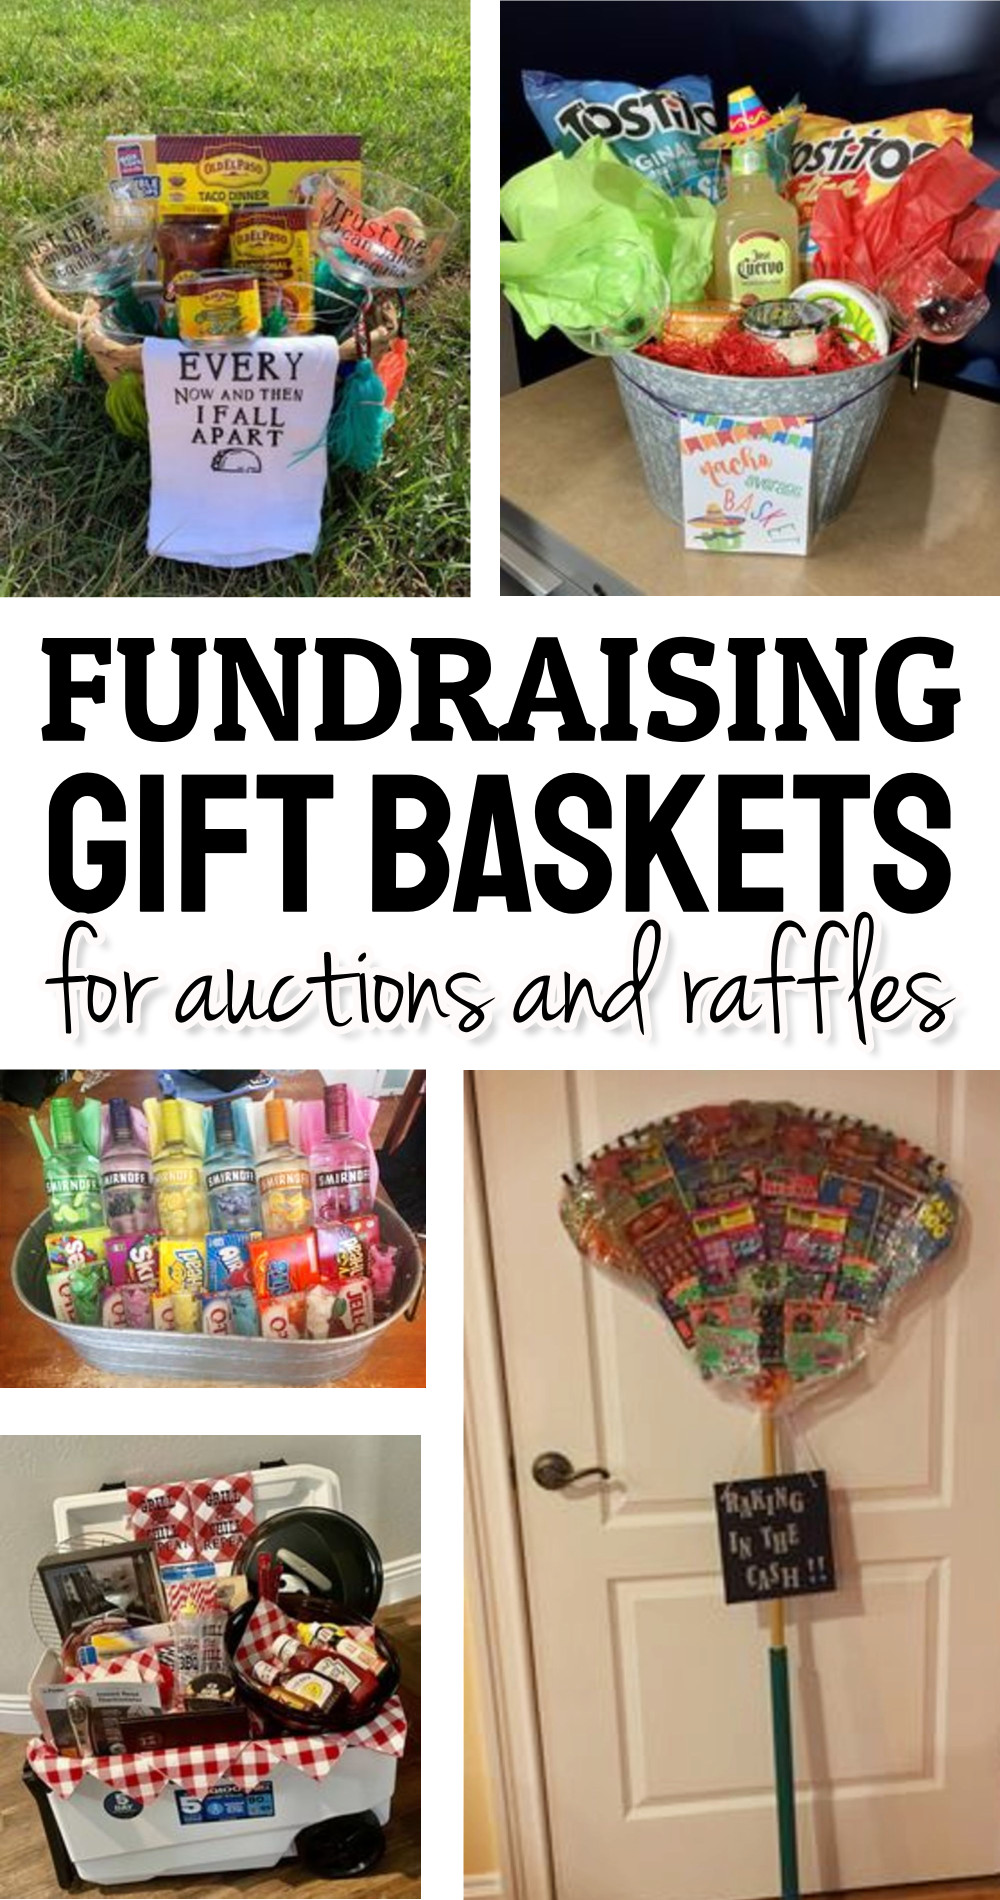 Fundraising Gift Baskets For Auctions and Raffles